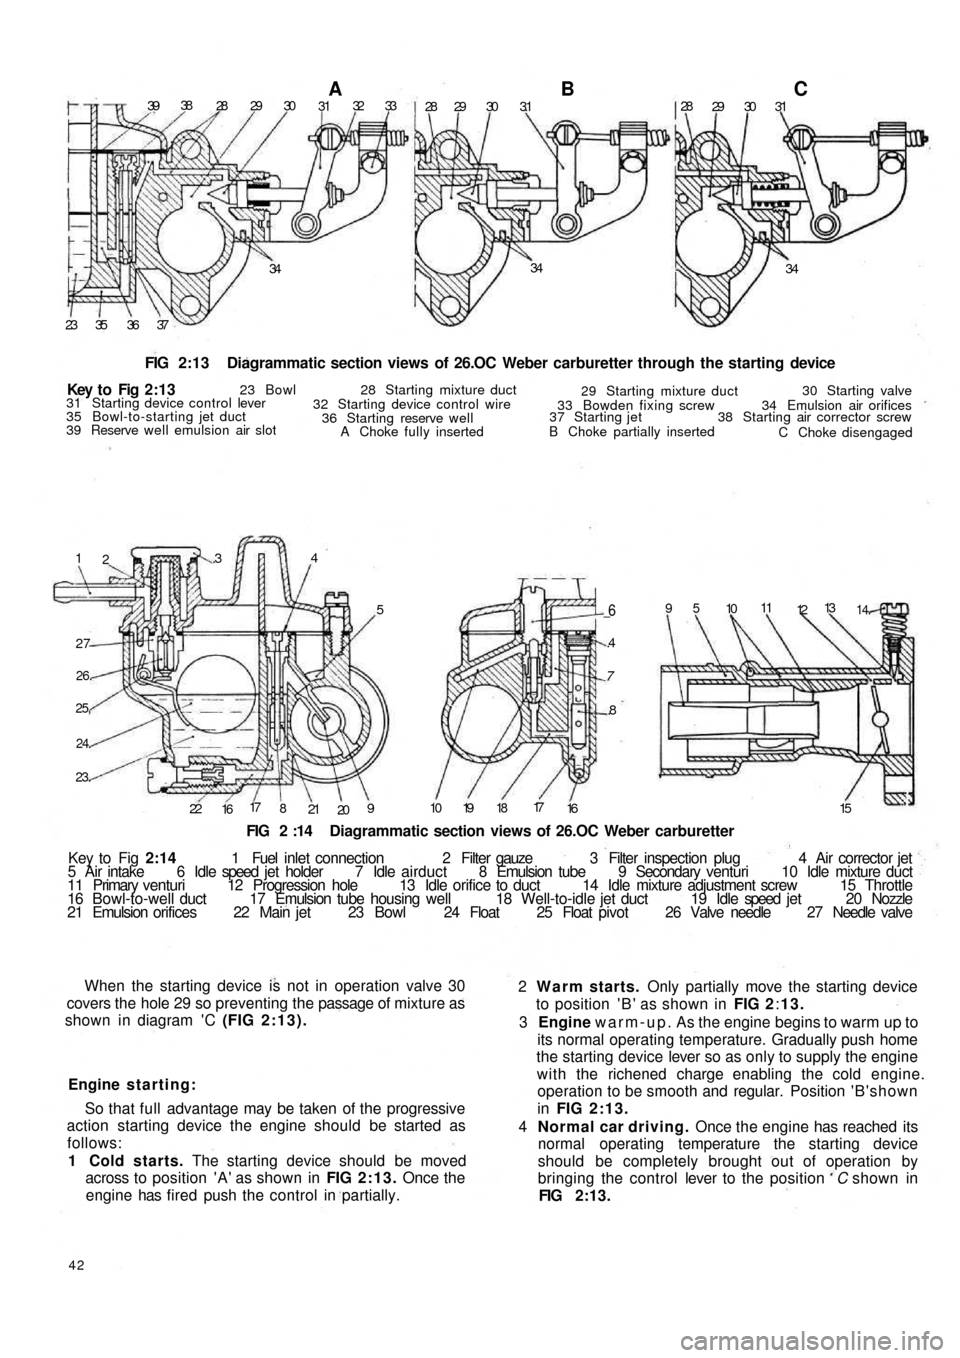 FIAT 500 1969 1.G Owners Guide 3938
28 29 30A3132 33
28 29 30 3.1B28
29 30 31C
34 34
34
37 36 35 23
FIG 2:13  Diagrammatic section views of 26.OC Weber carburetter through the starting device
1
2.34
5
27
26.
25,
24.
23.
22
1617
8
2